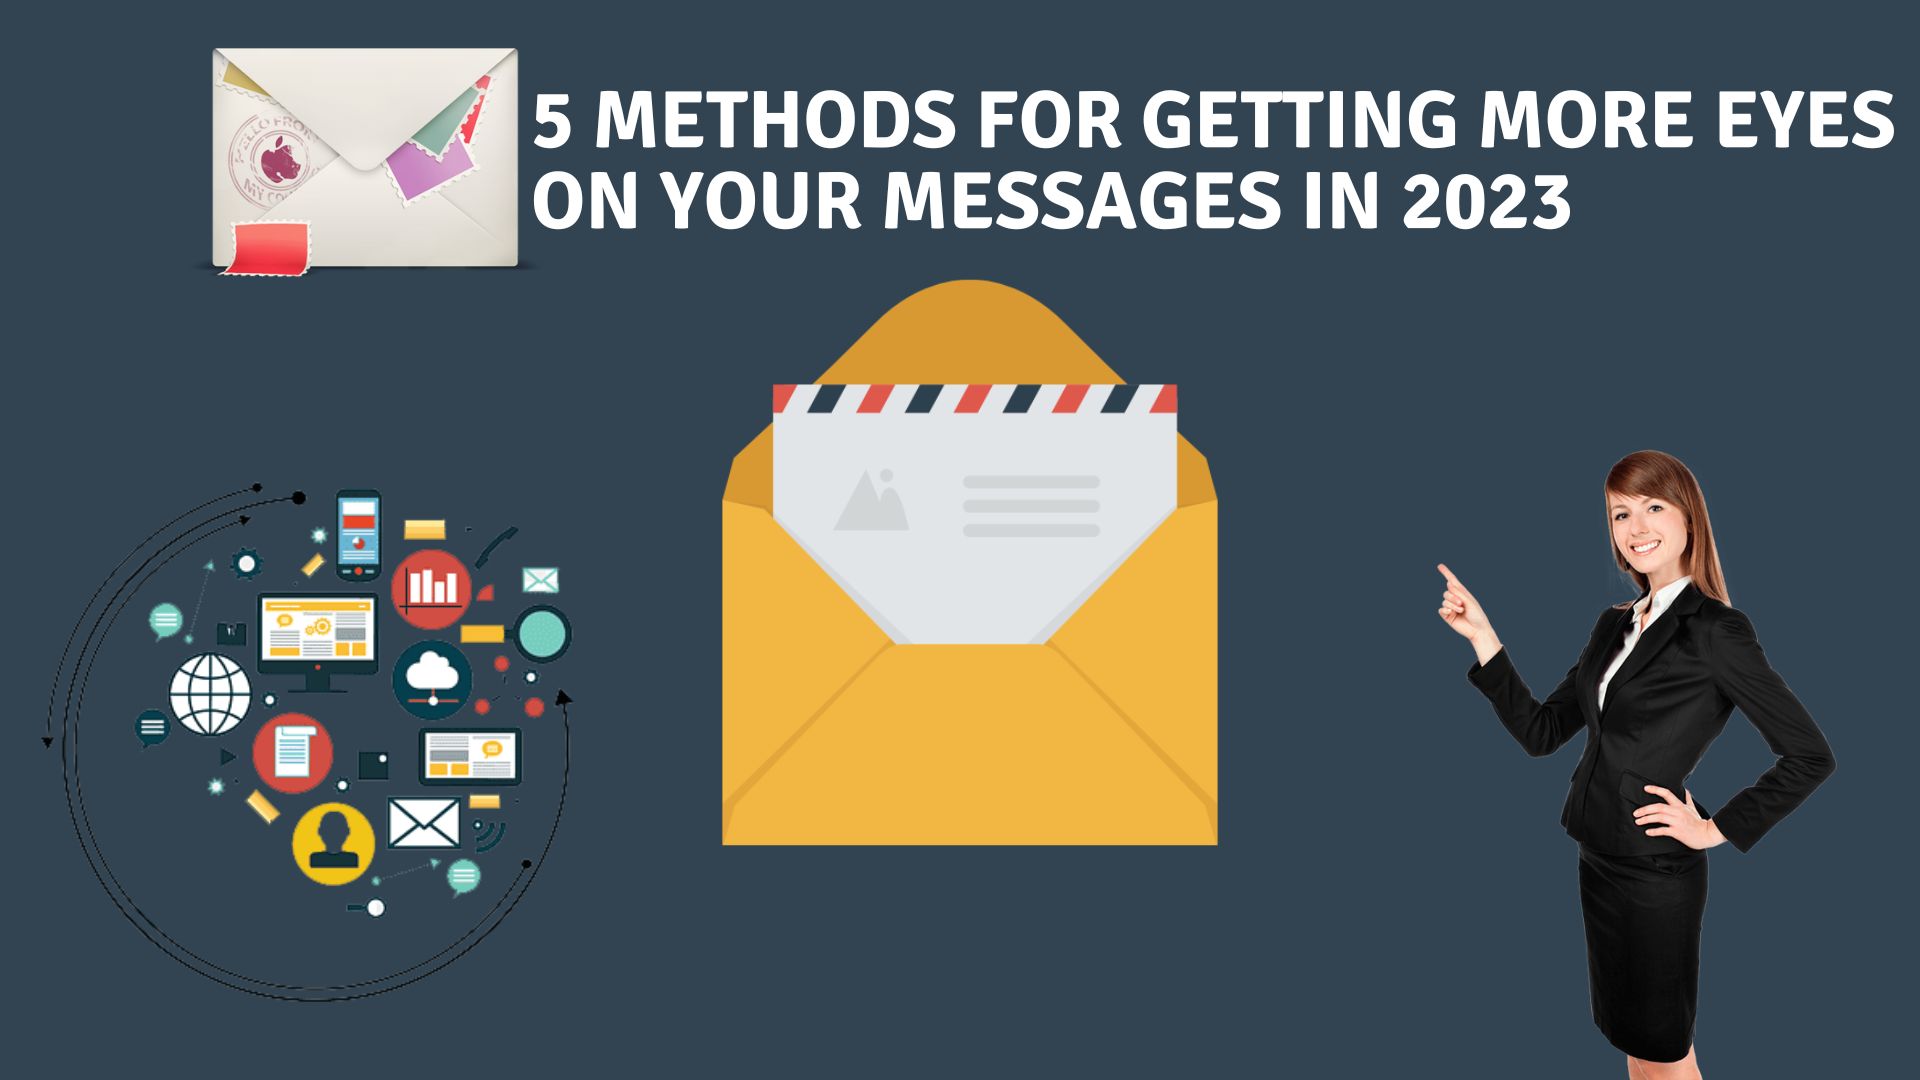 5 methods for getting more eyes on your messages in 2023